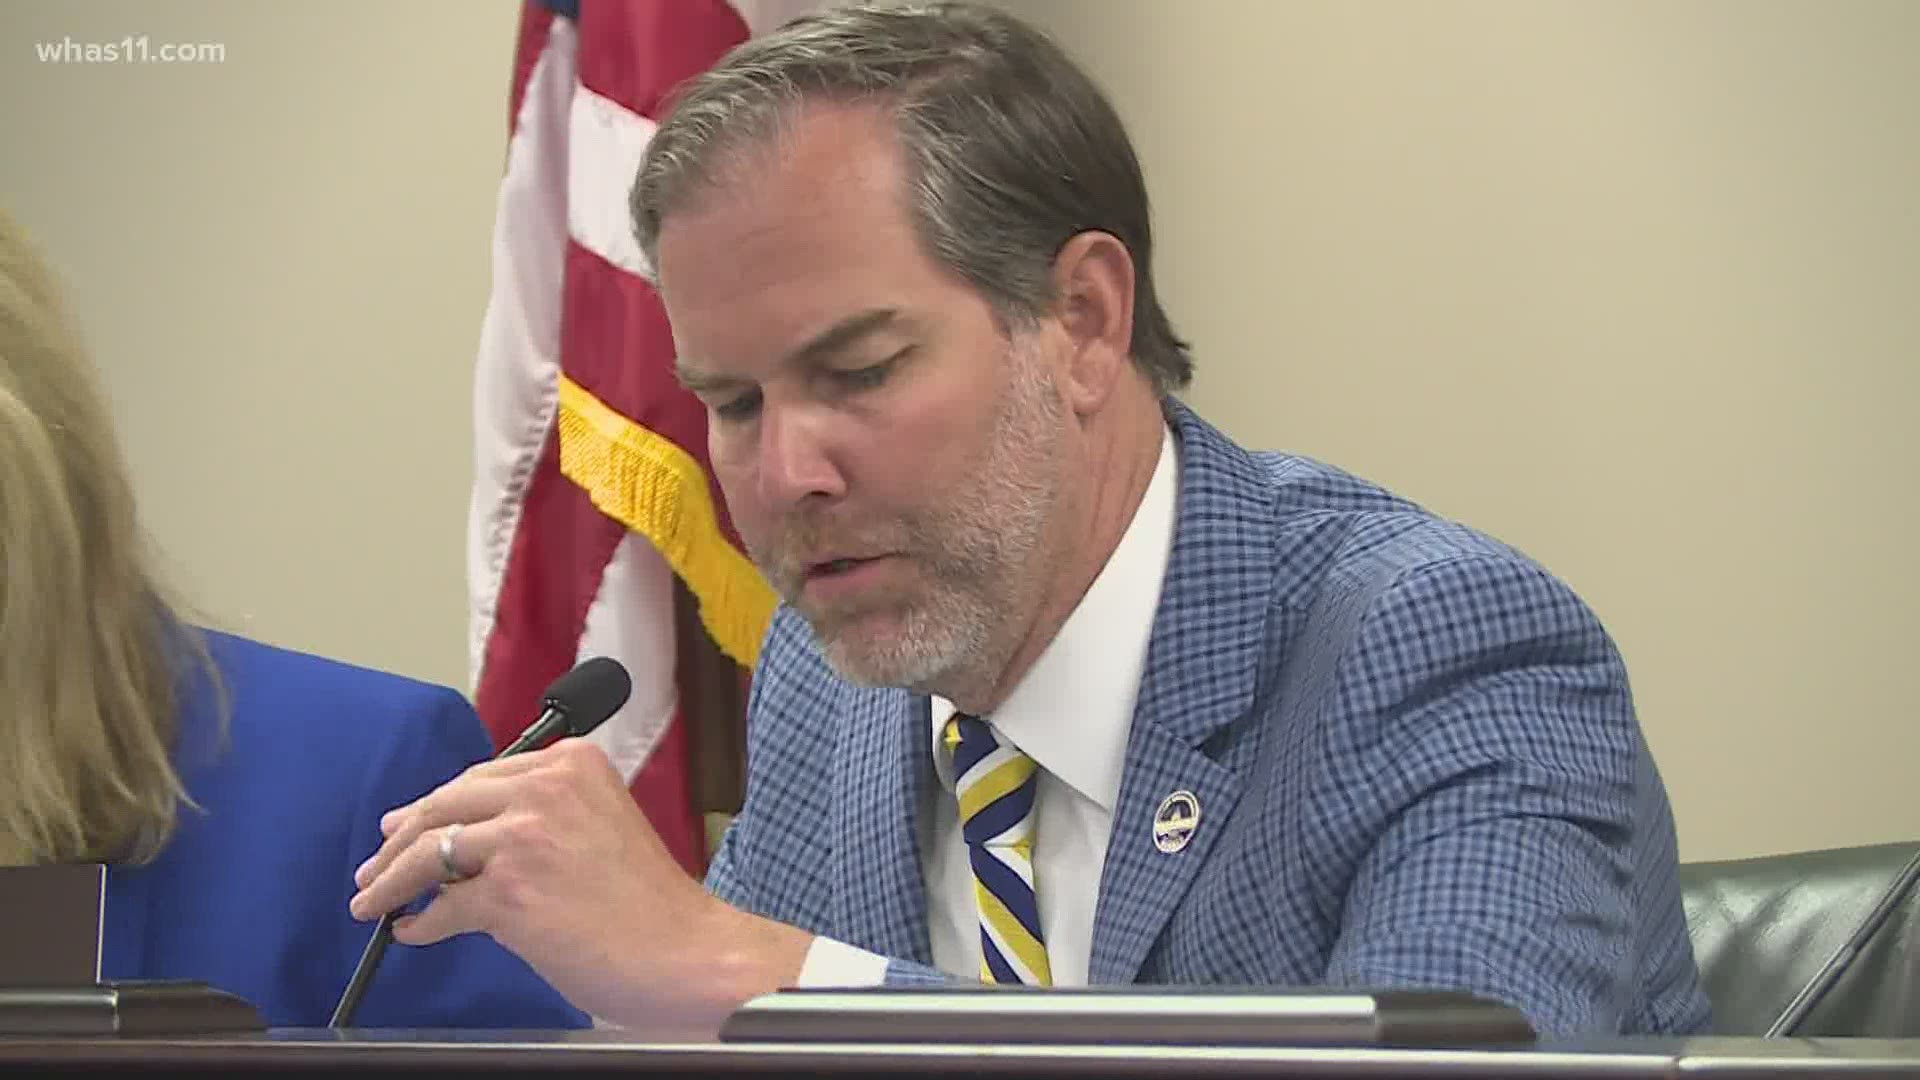 State Sen. Max Wise was not wearing a mask when he led a committee meeting just one week before announcing his positive COVID-19 test.